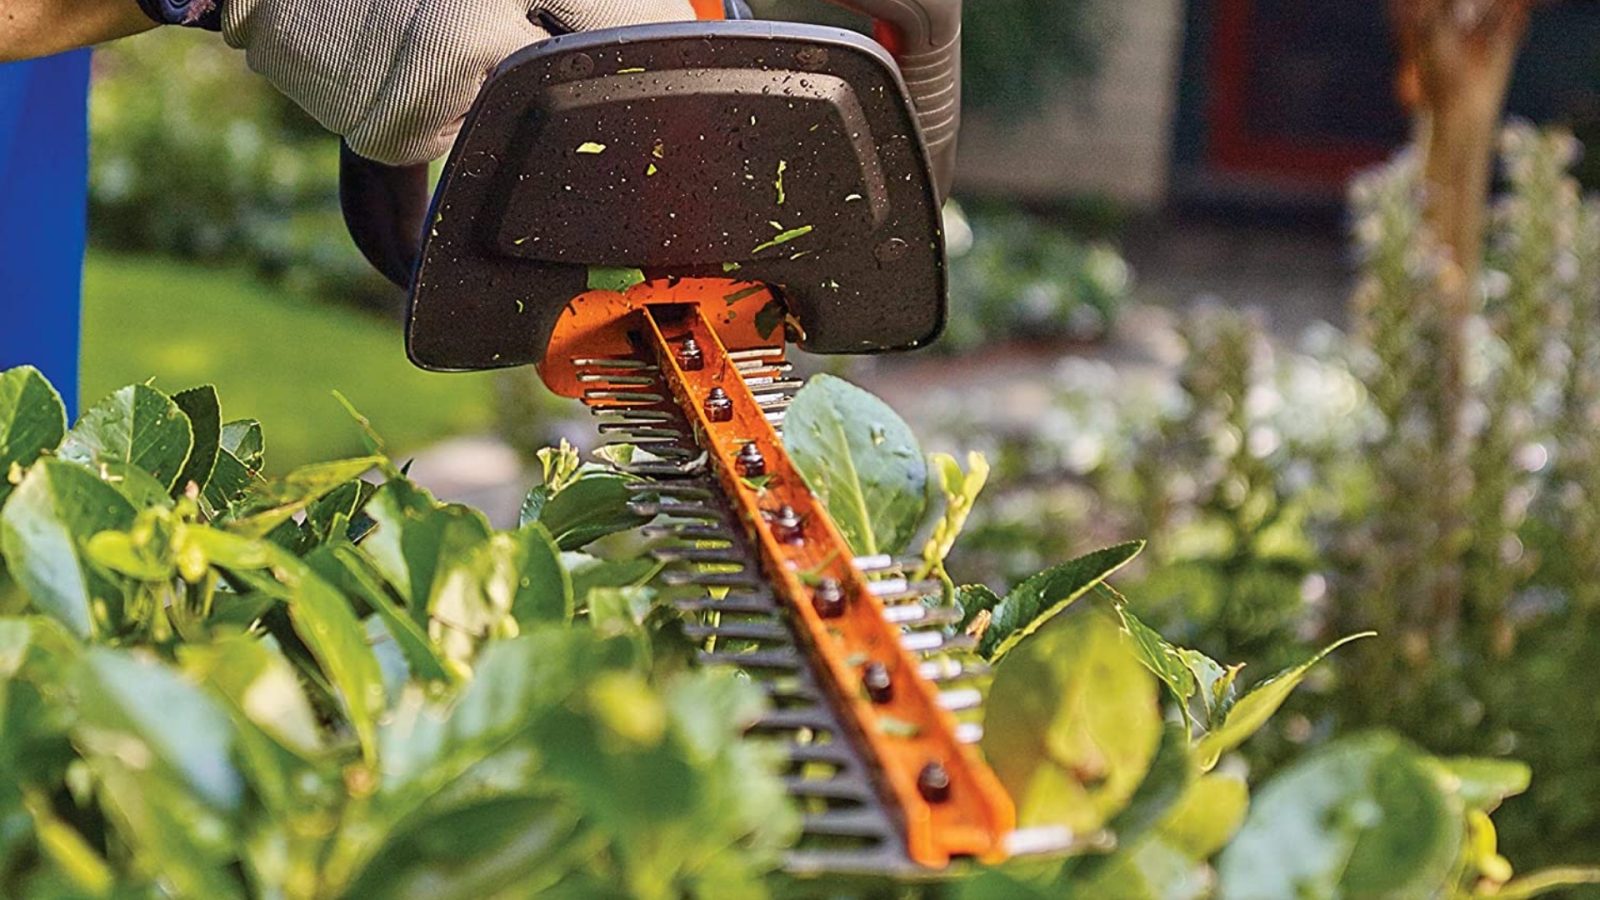 Green Deals: Tidy up the yard with a 20V hedge trimmer from BLACK+DECKER at  $89, more